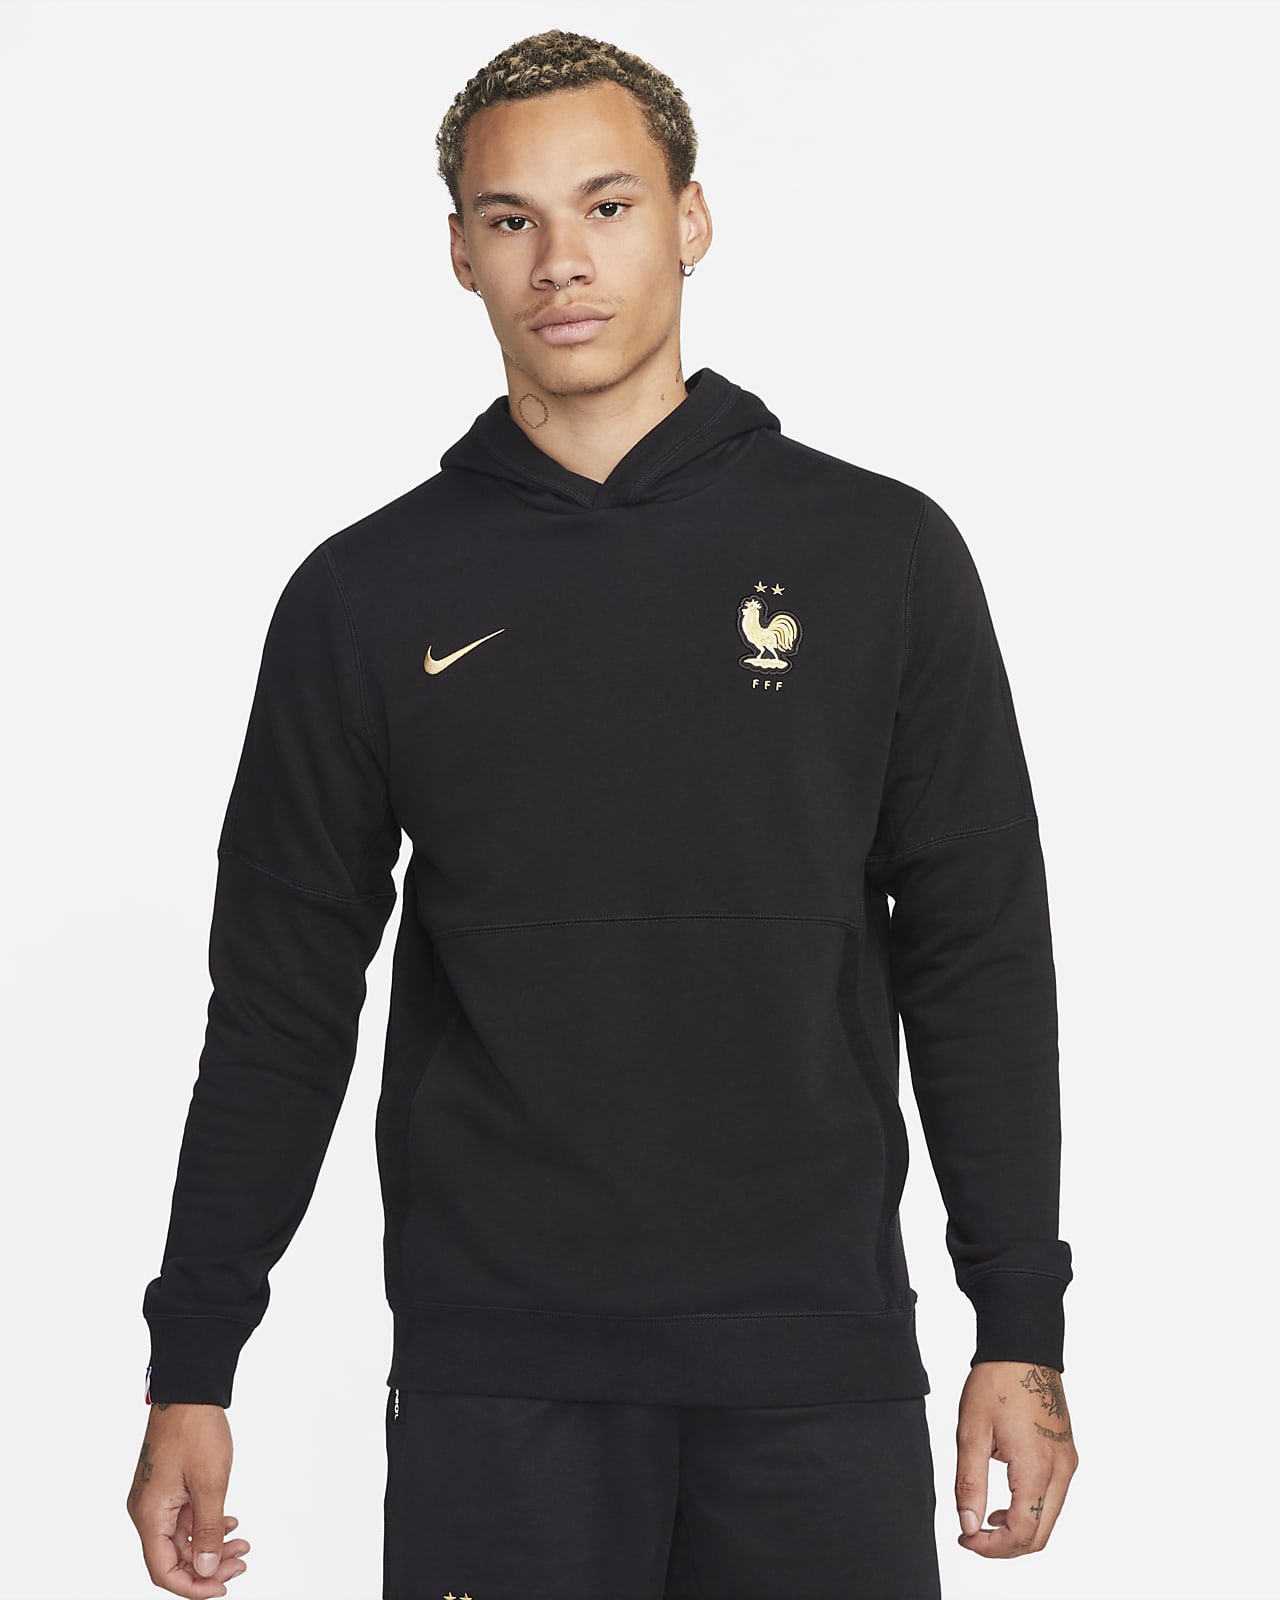 FFF Men's French Terry Football Hoodie